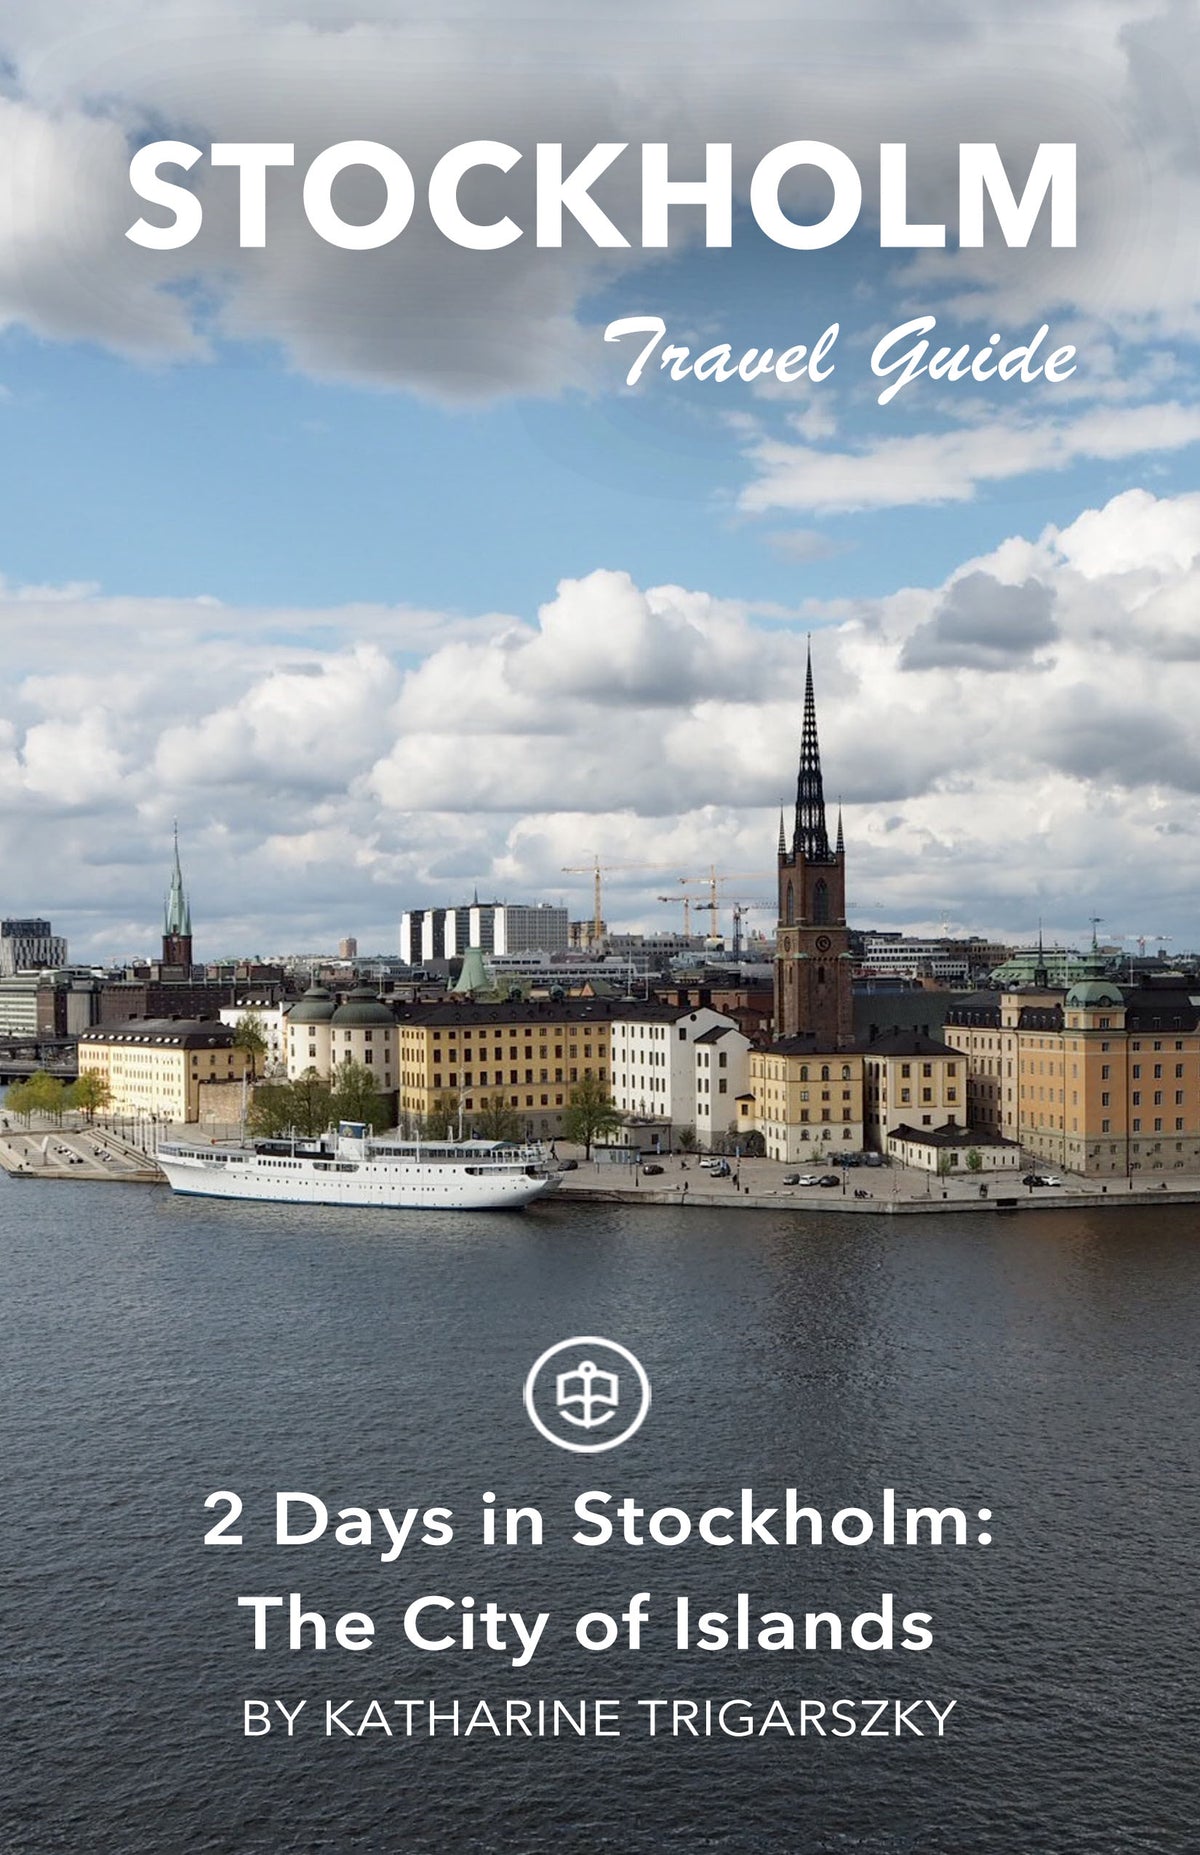 2 Days in Stockholm: The City of Islands